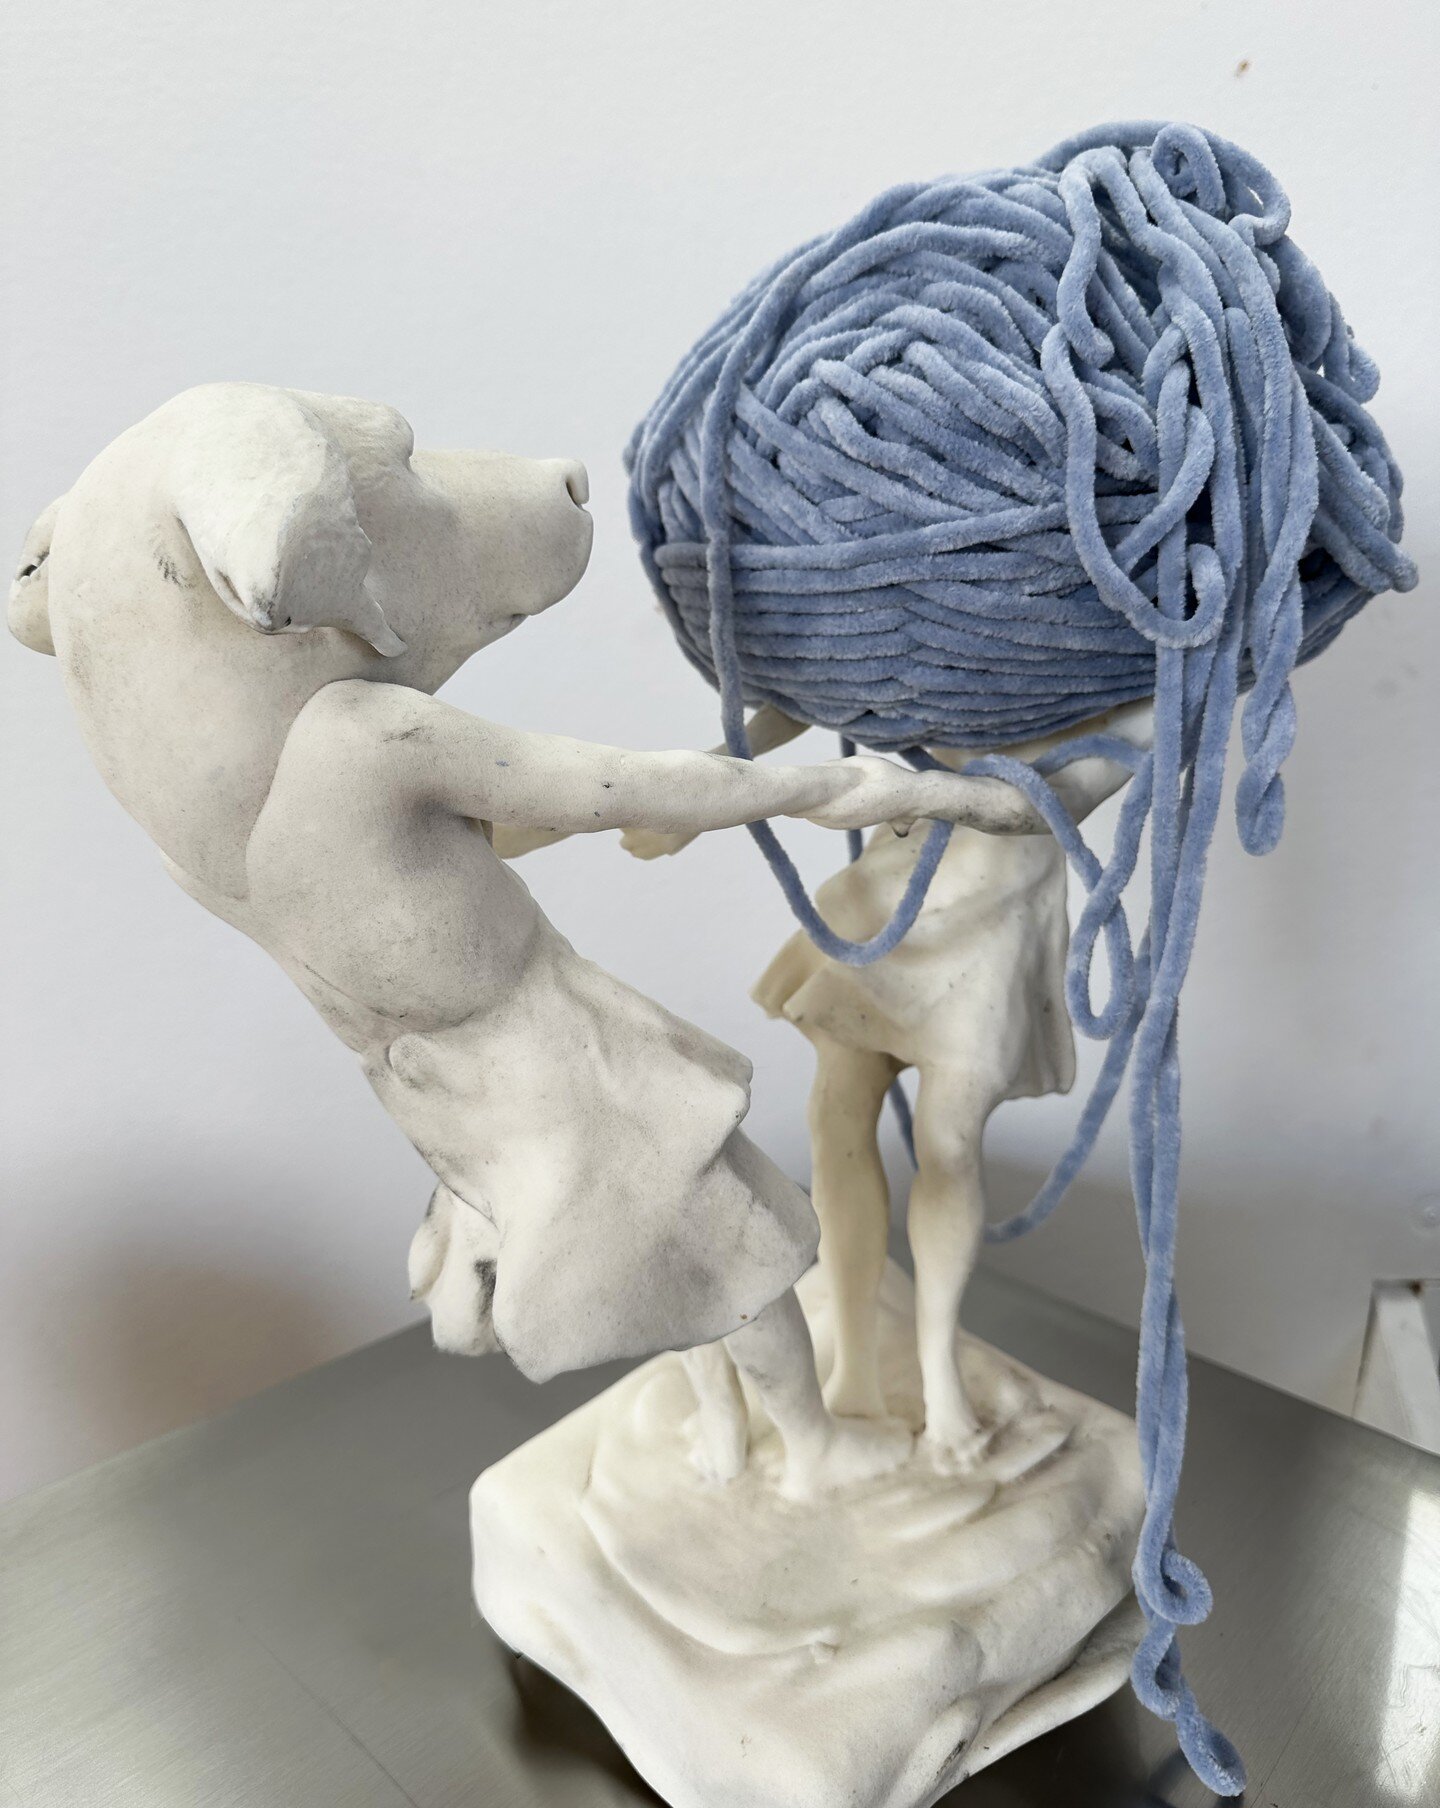 dance...another view of this sculpture today. The blue soft yarn, casually bundled and draped feels right, comforting, hiding, offering safety, pleasure...with a best friend. Sometimes girls dance, and hide. #sculpture #multimediasculpture #dressmate